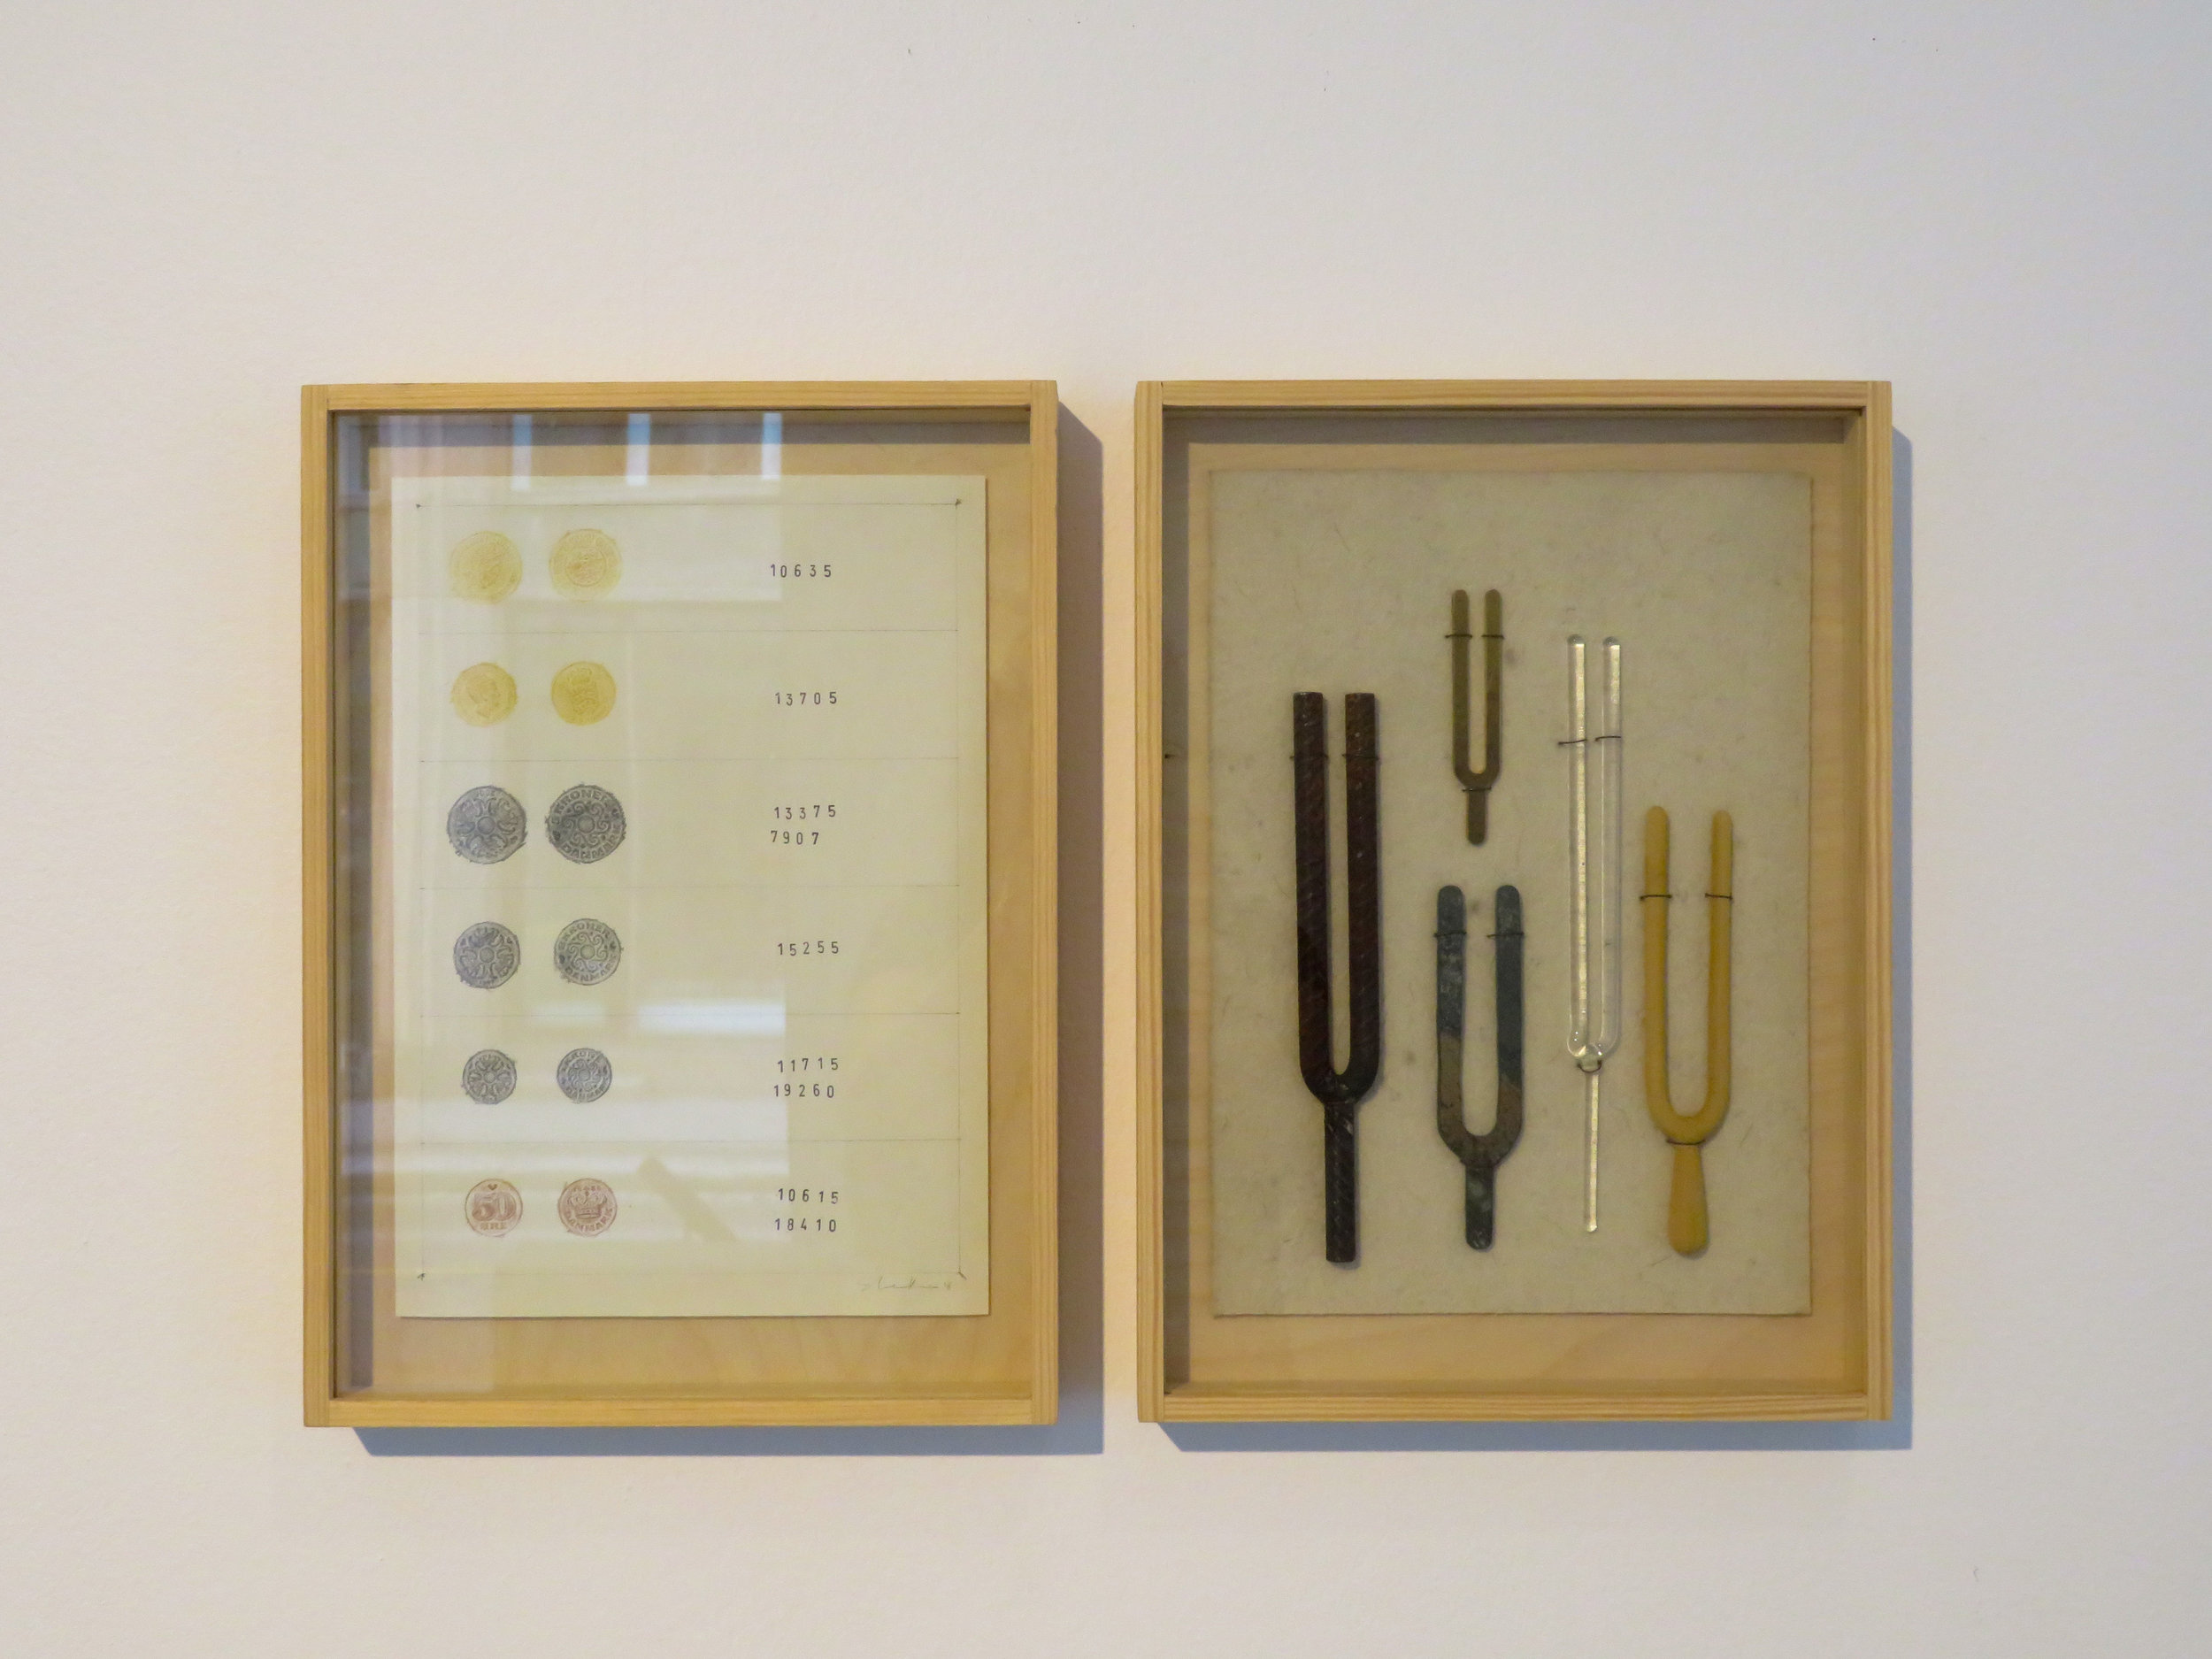   Framed Research (coins)    Framed Research (forks)   Photo credit: Courtesy of Galleri Format Oslo 